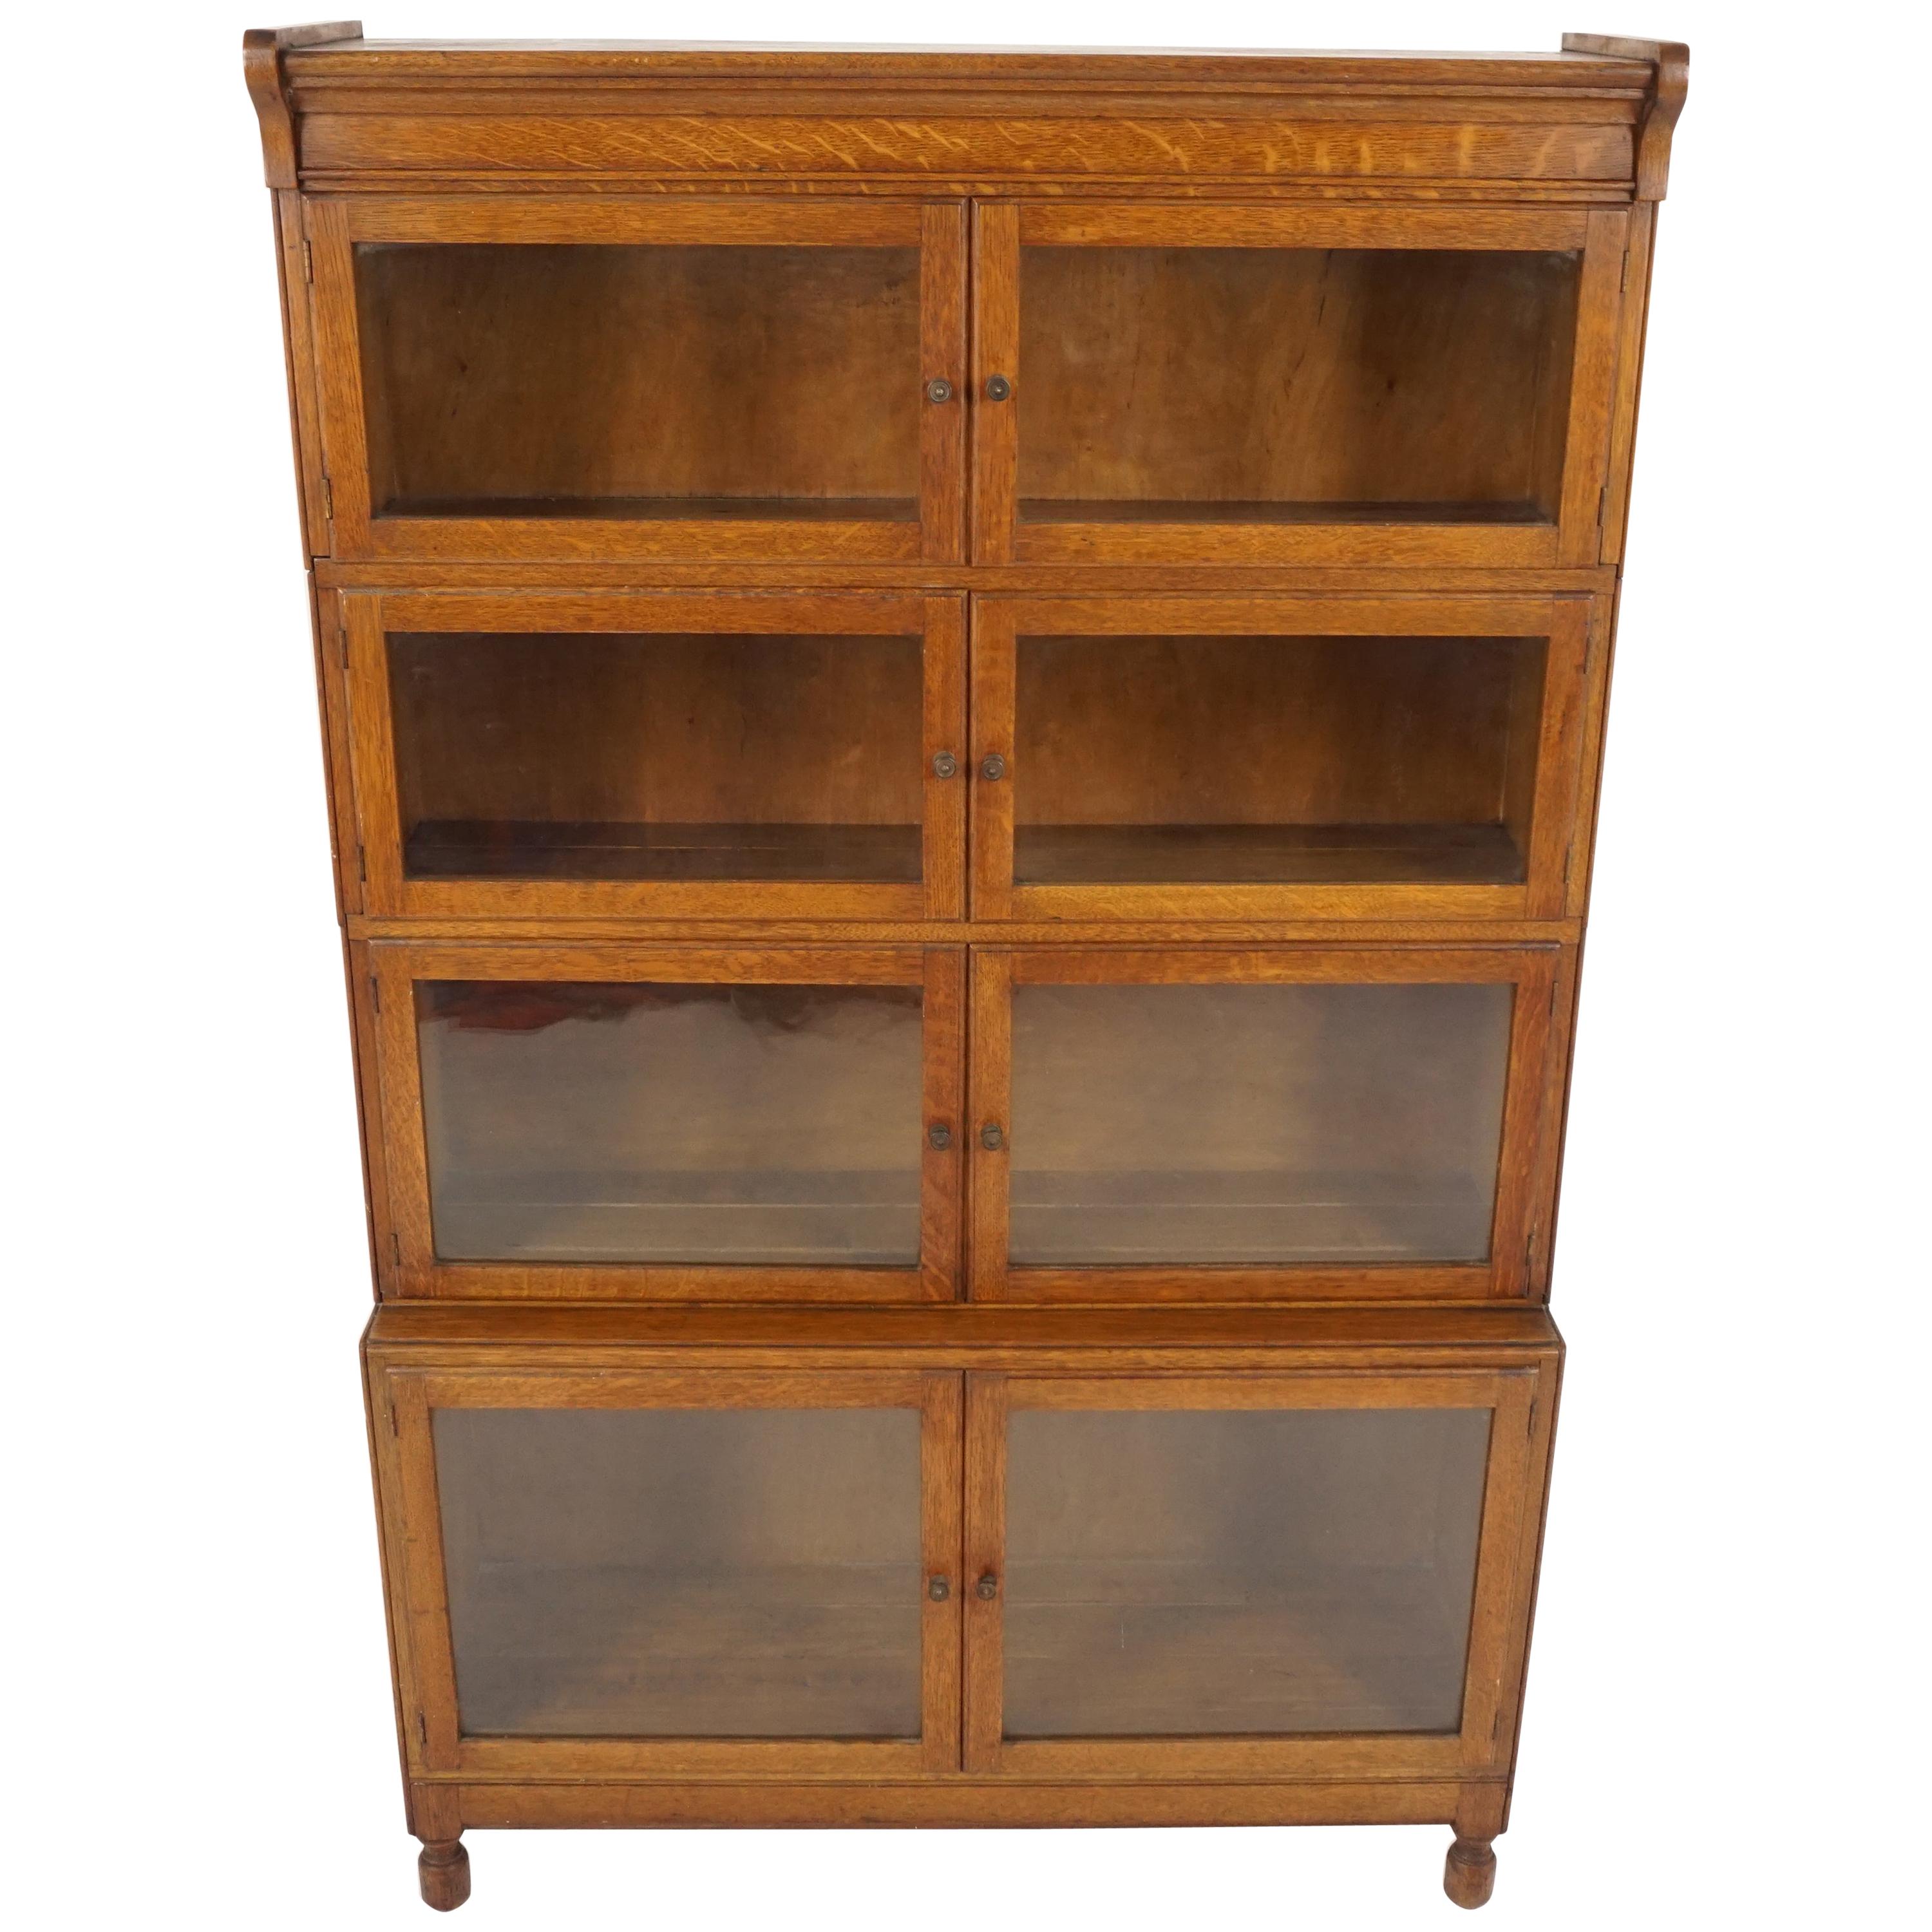 Antique Oak Lawyer Bookcase, Sectional Bookcase "By Minty", England 1920, B2224